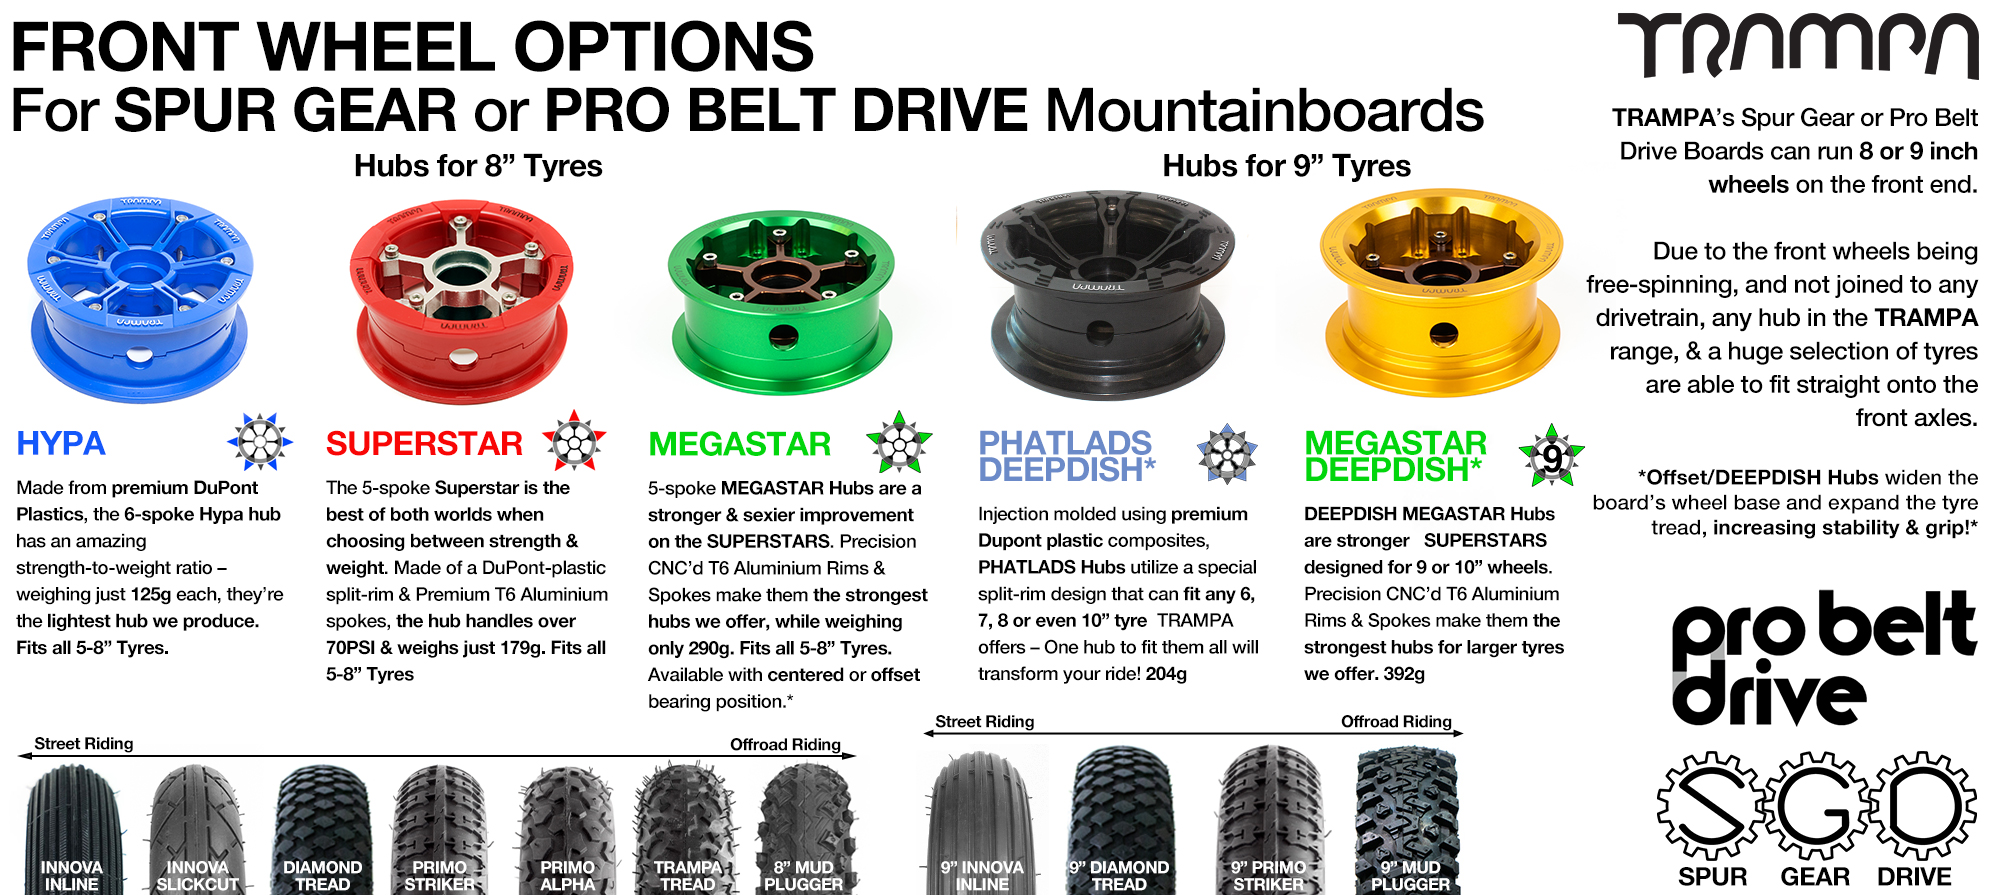 Build your own Custom TRAMPA Wheel to fit to your SPUR GEAR DRIVE Motor Mount. You can fit PHATLADS, SUPERSTARSS, PRIMO's or  MEGASTAR's DEEP DISH MEGASTAR's! 8, 9 or 10 Inch wheels of awesome selection for on & off road! Amazing!!